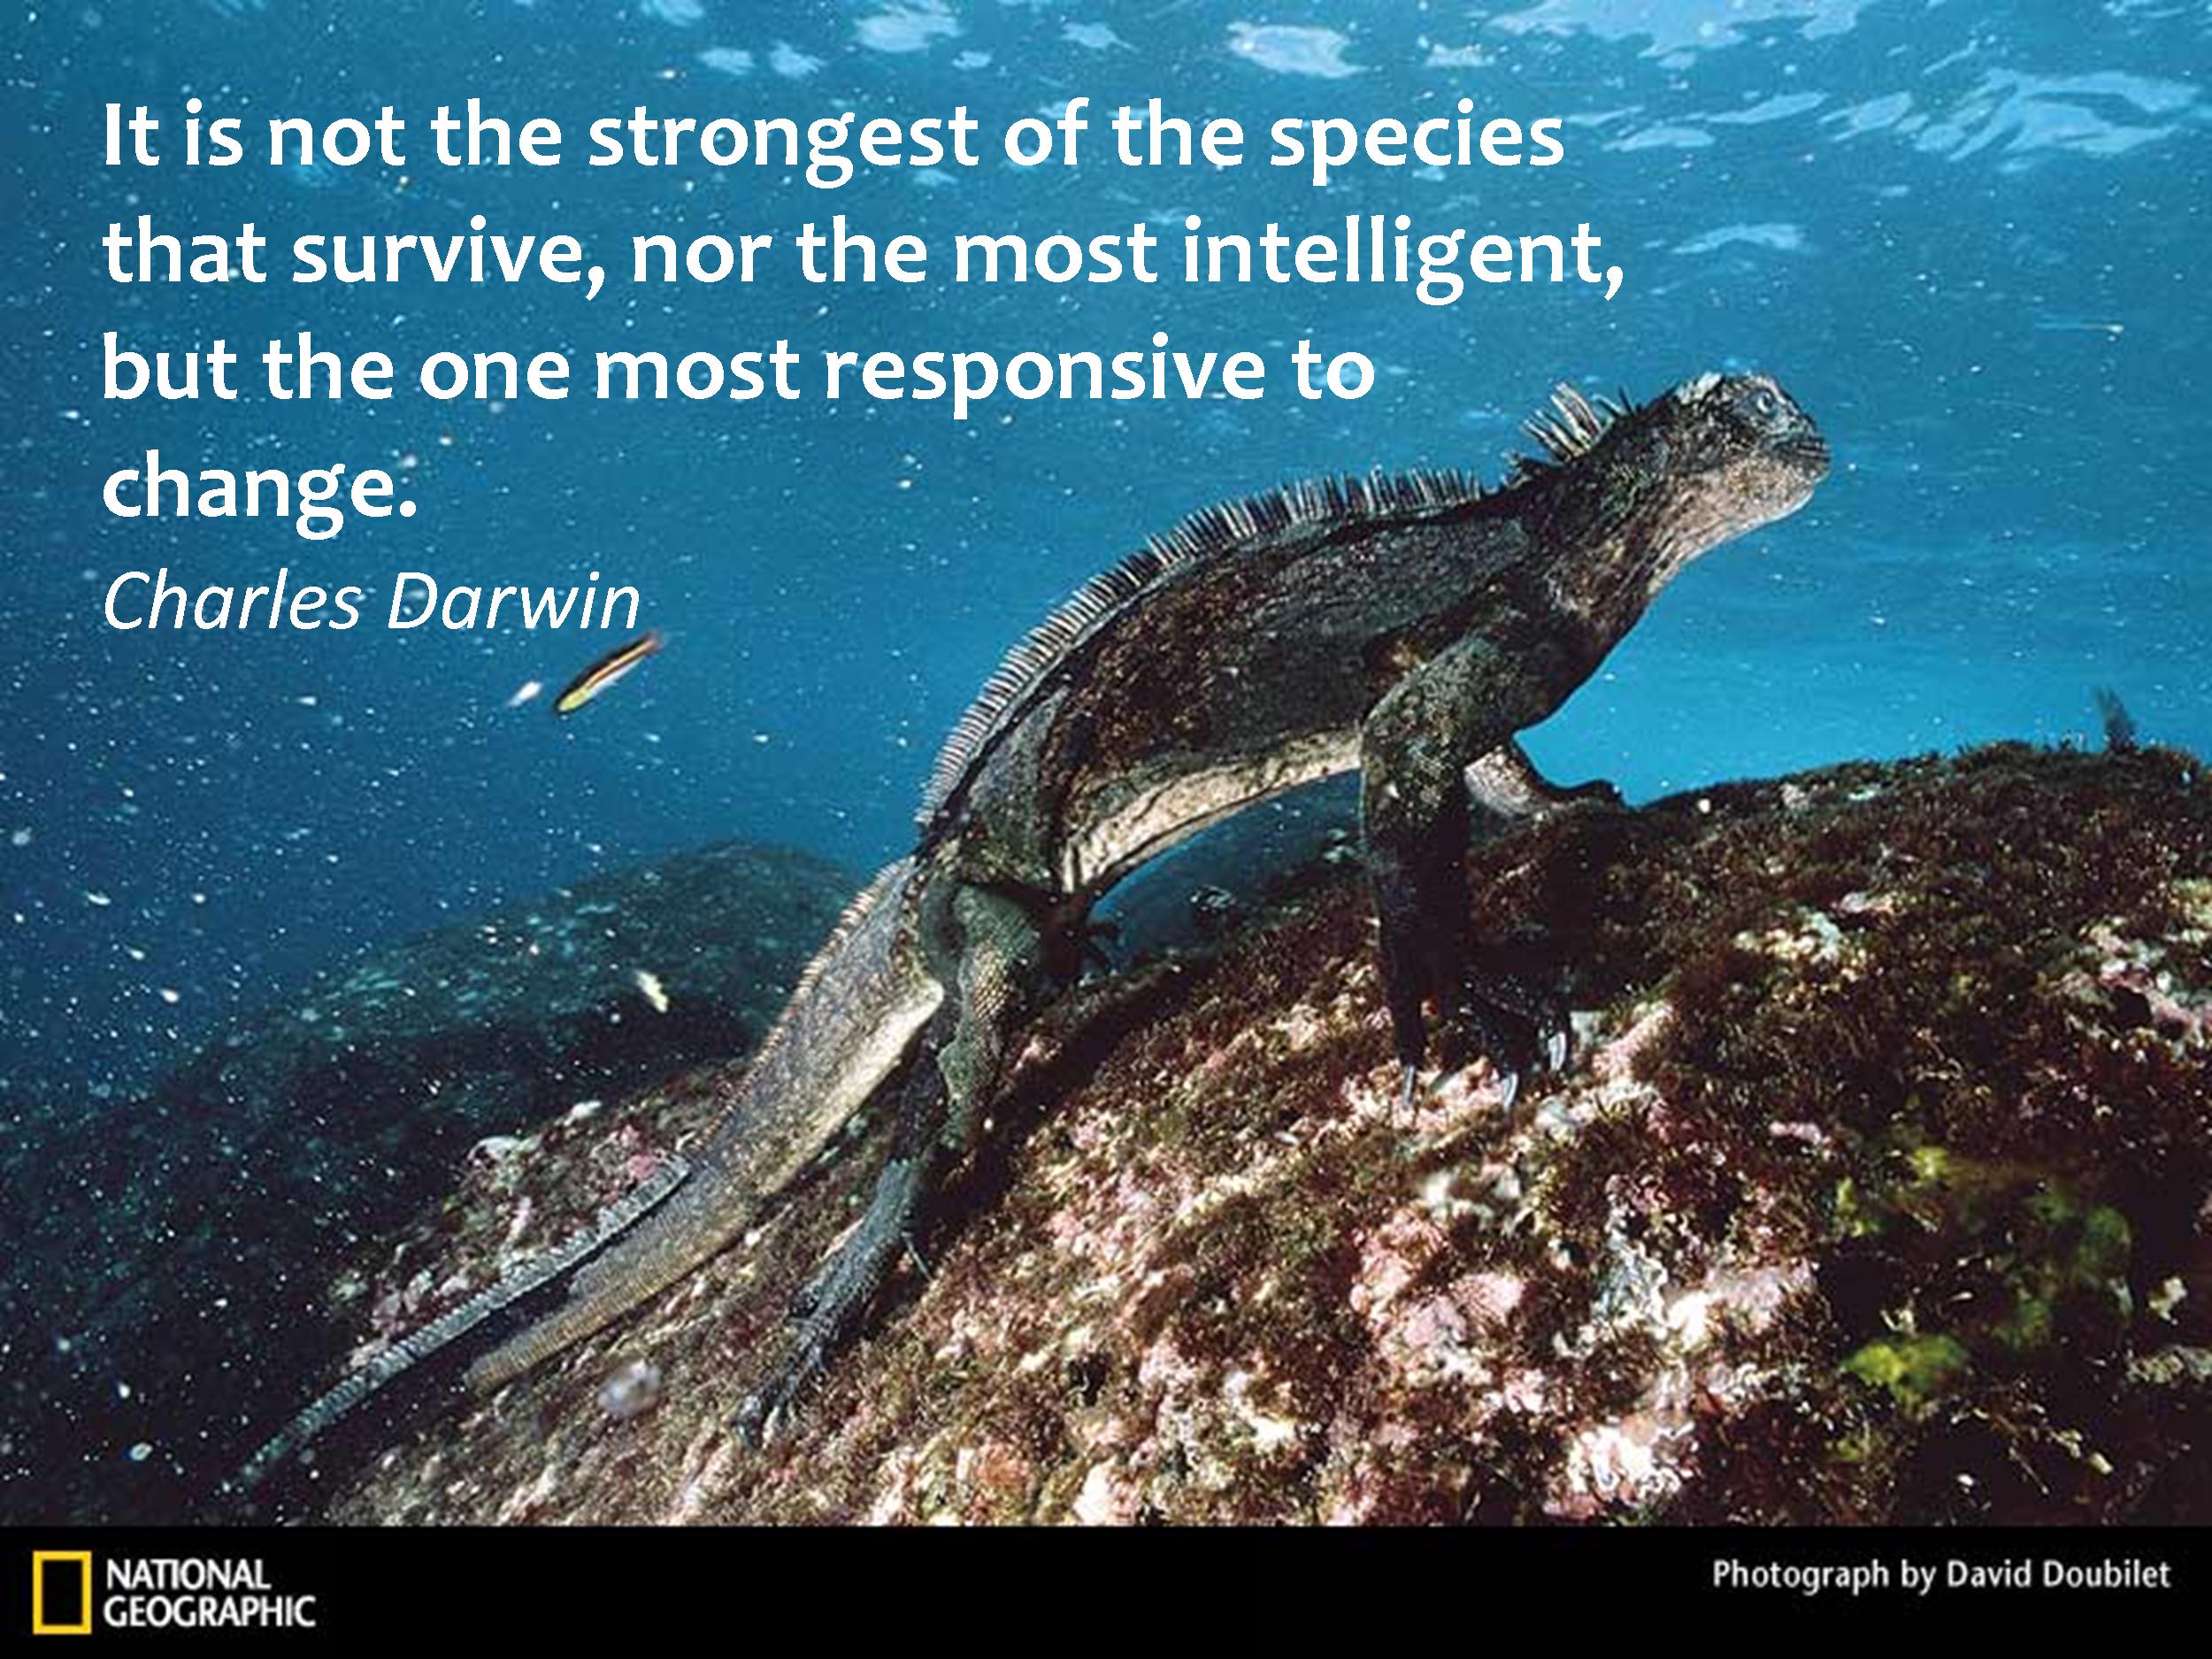 Resilient quote #4